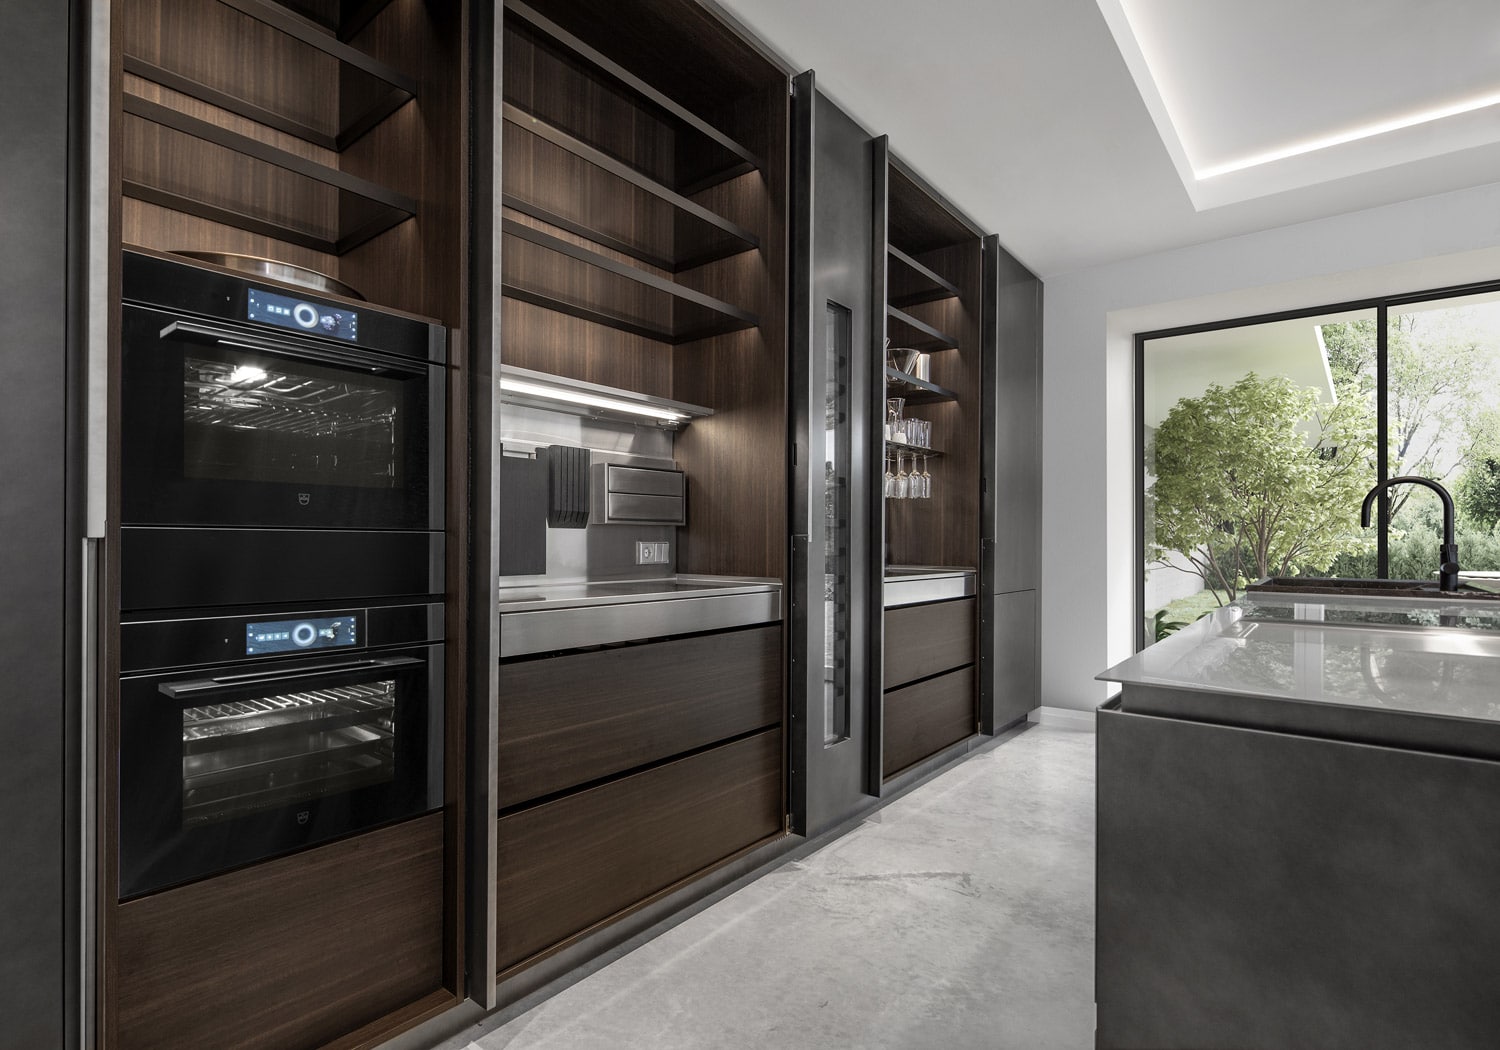 Used on most of the tall units, the pocket doors fold out of the way to give full access to the contents of the units, which are customized to provide distinct – and elegant - workstations within the kitchen.  